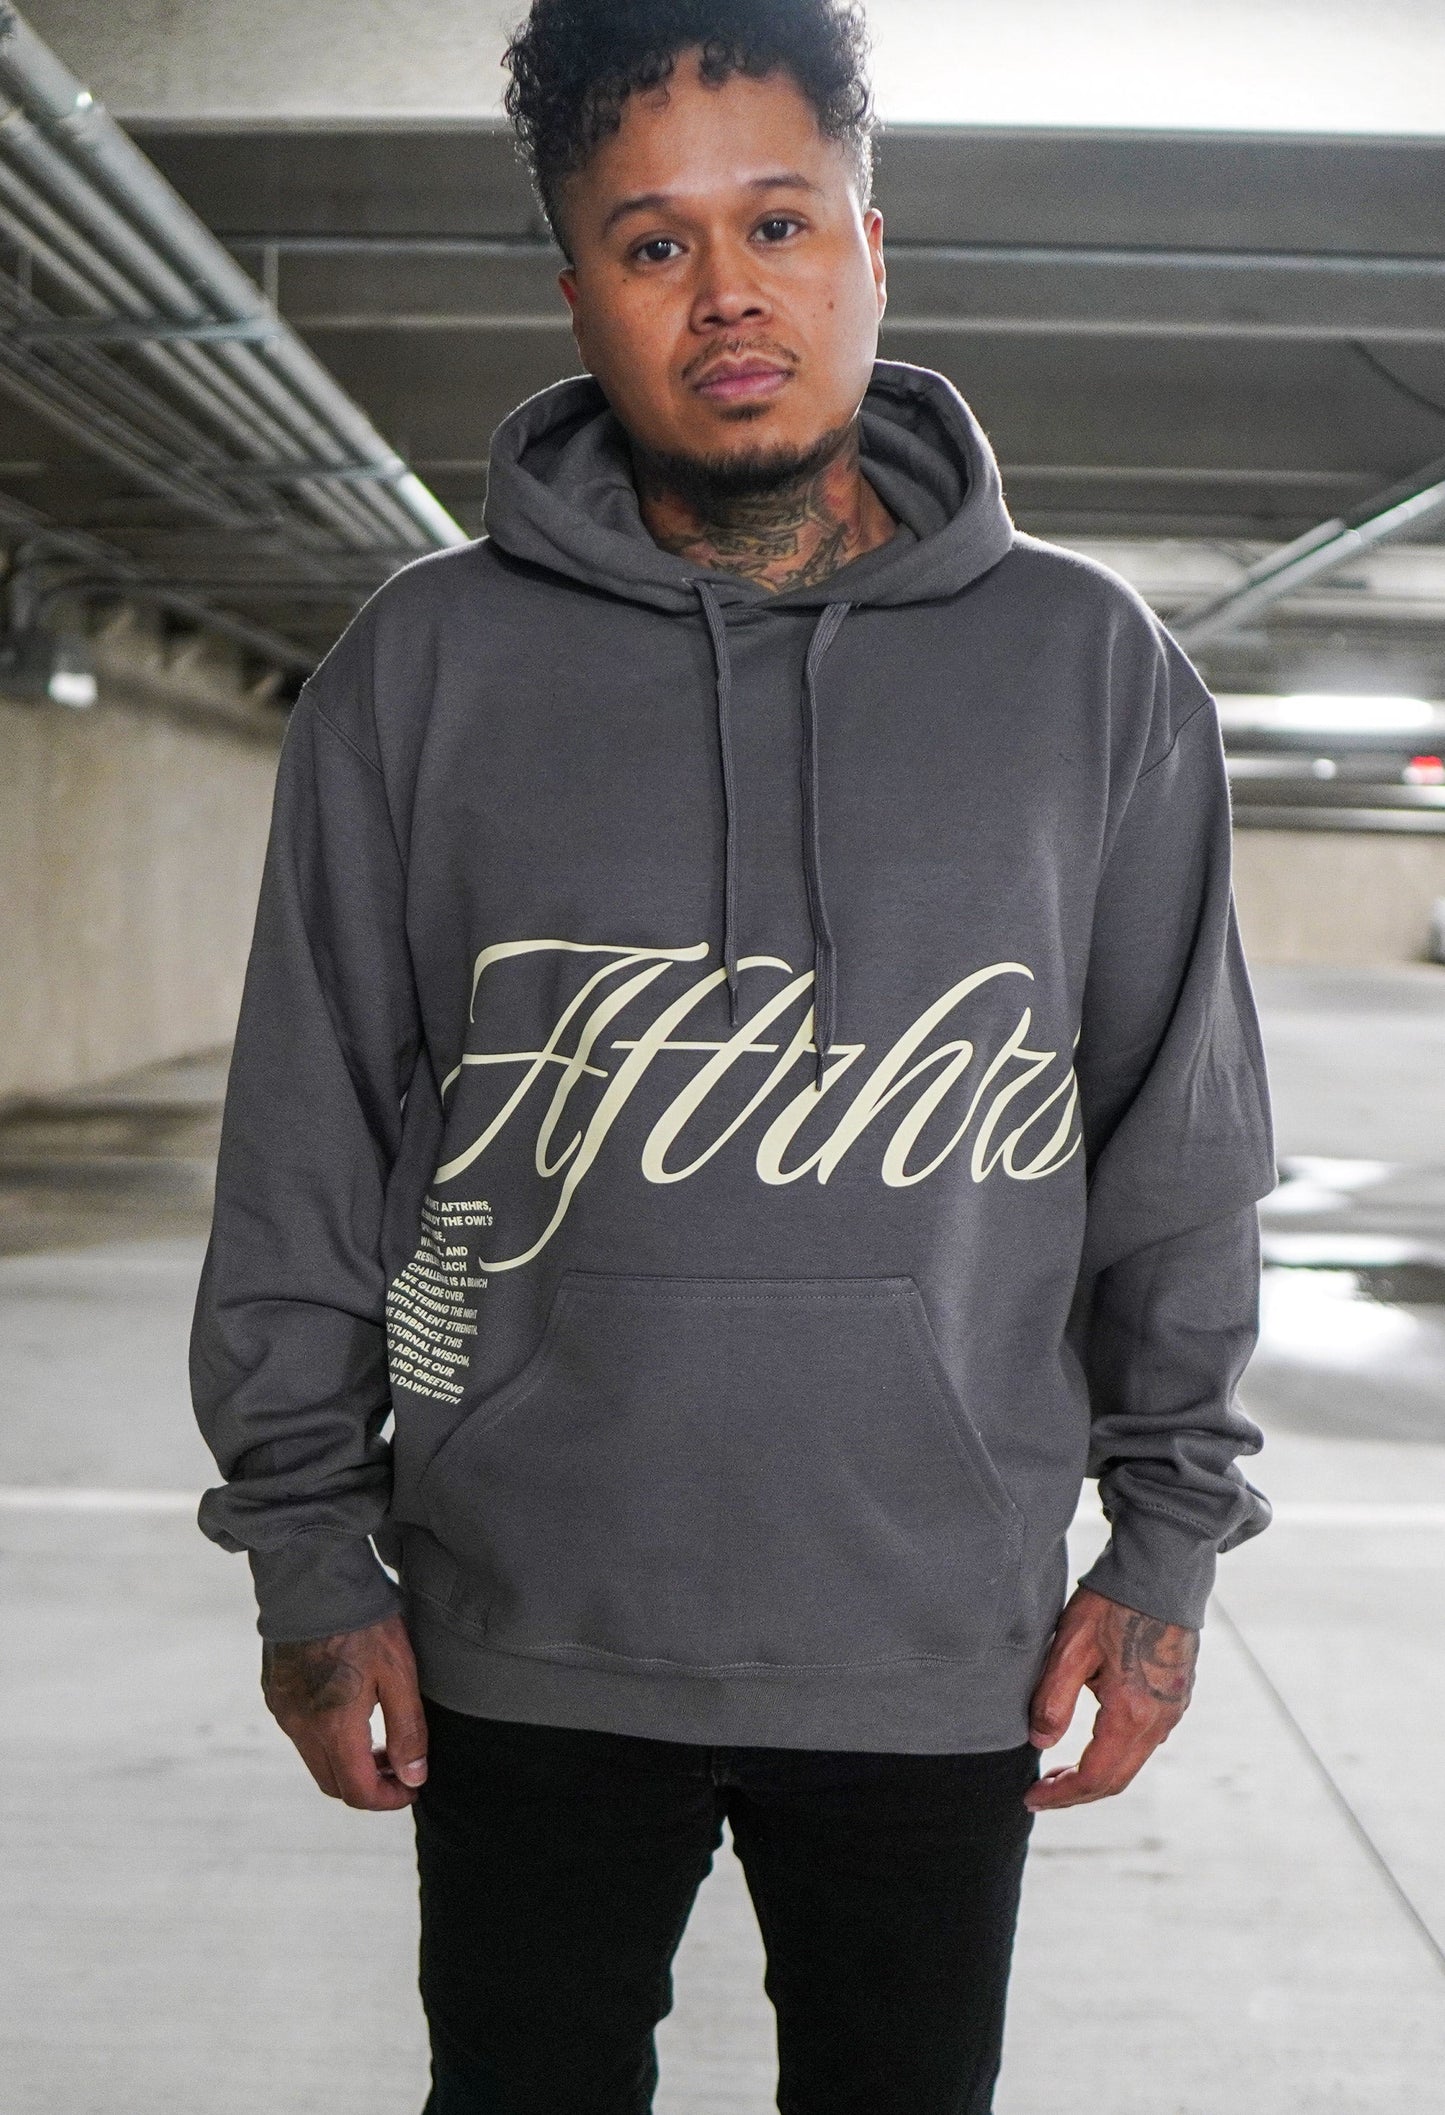 Rise Above Hoodie - Charcoal / Cream - FREE w/ Purchase of 2 Hoodies